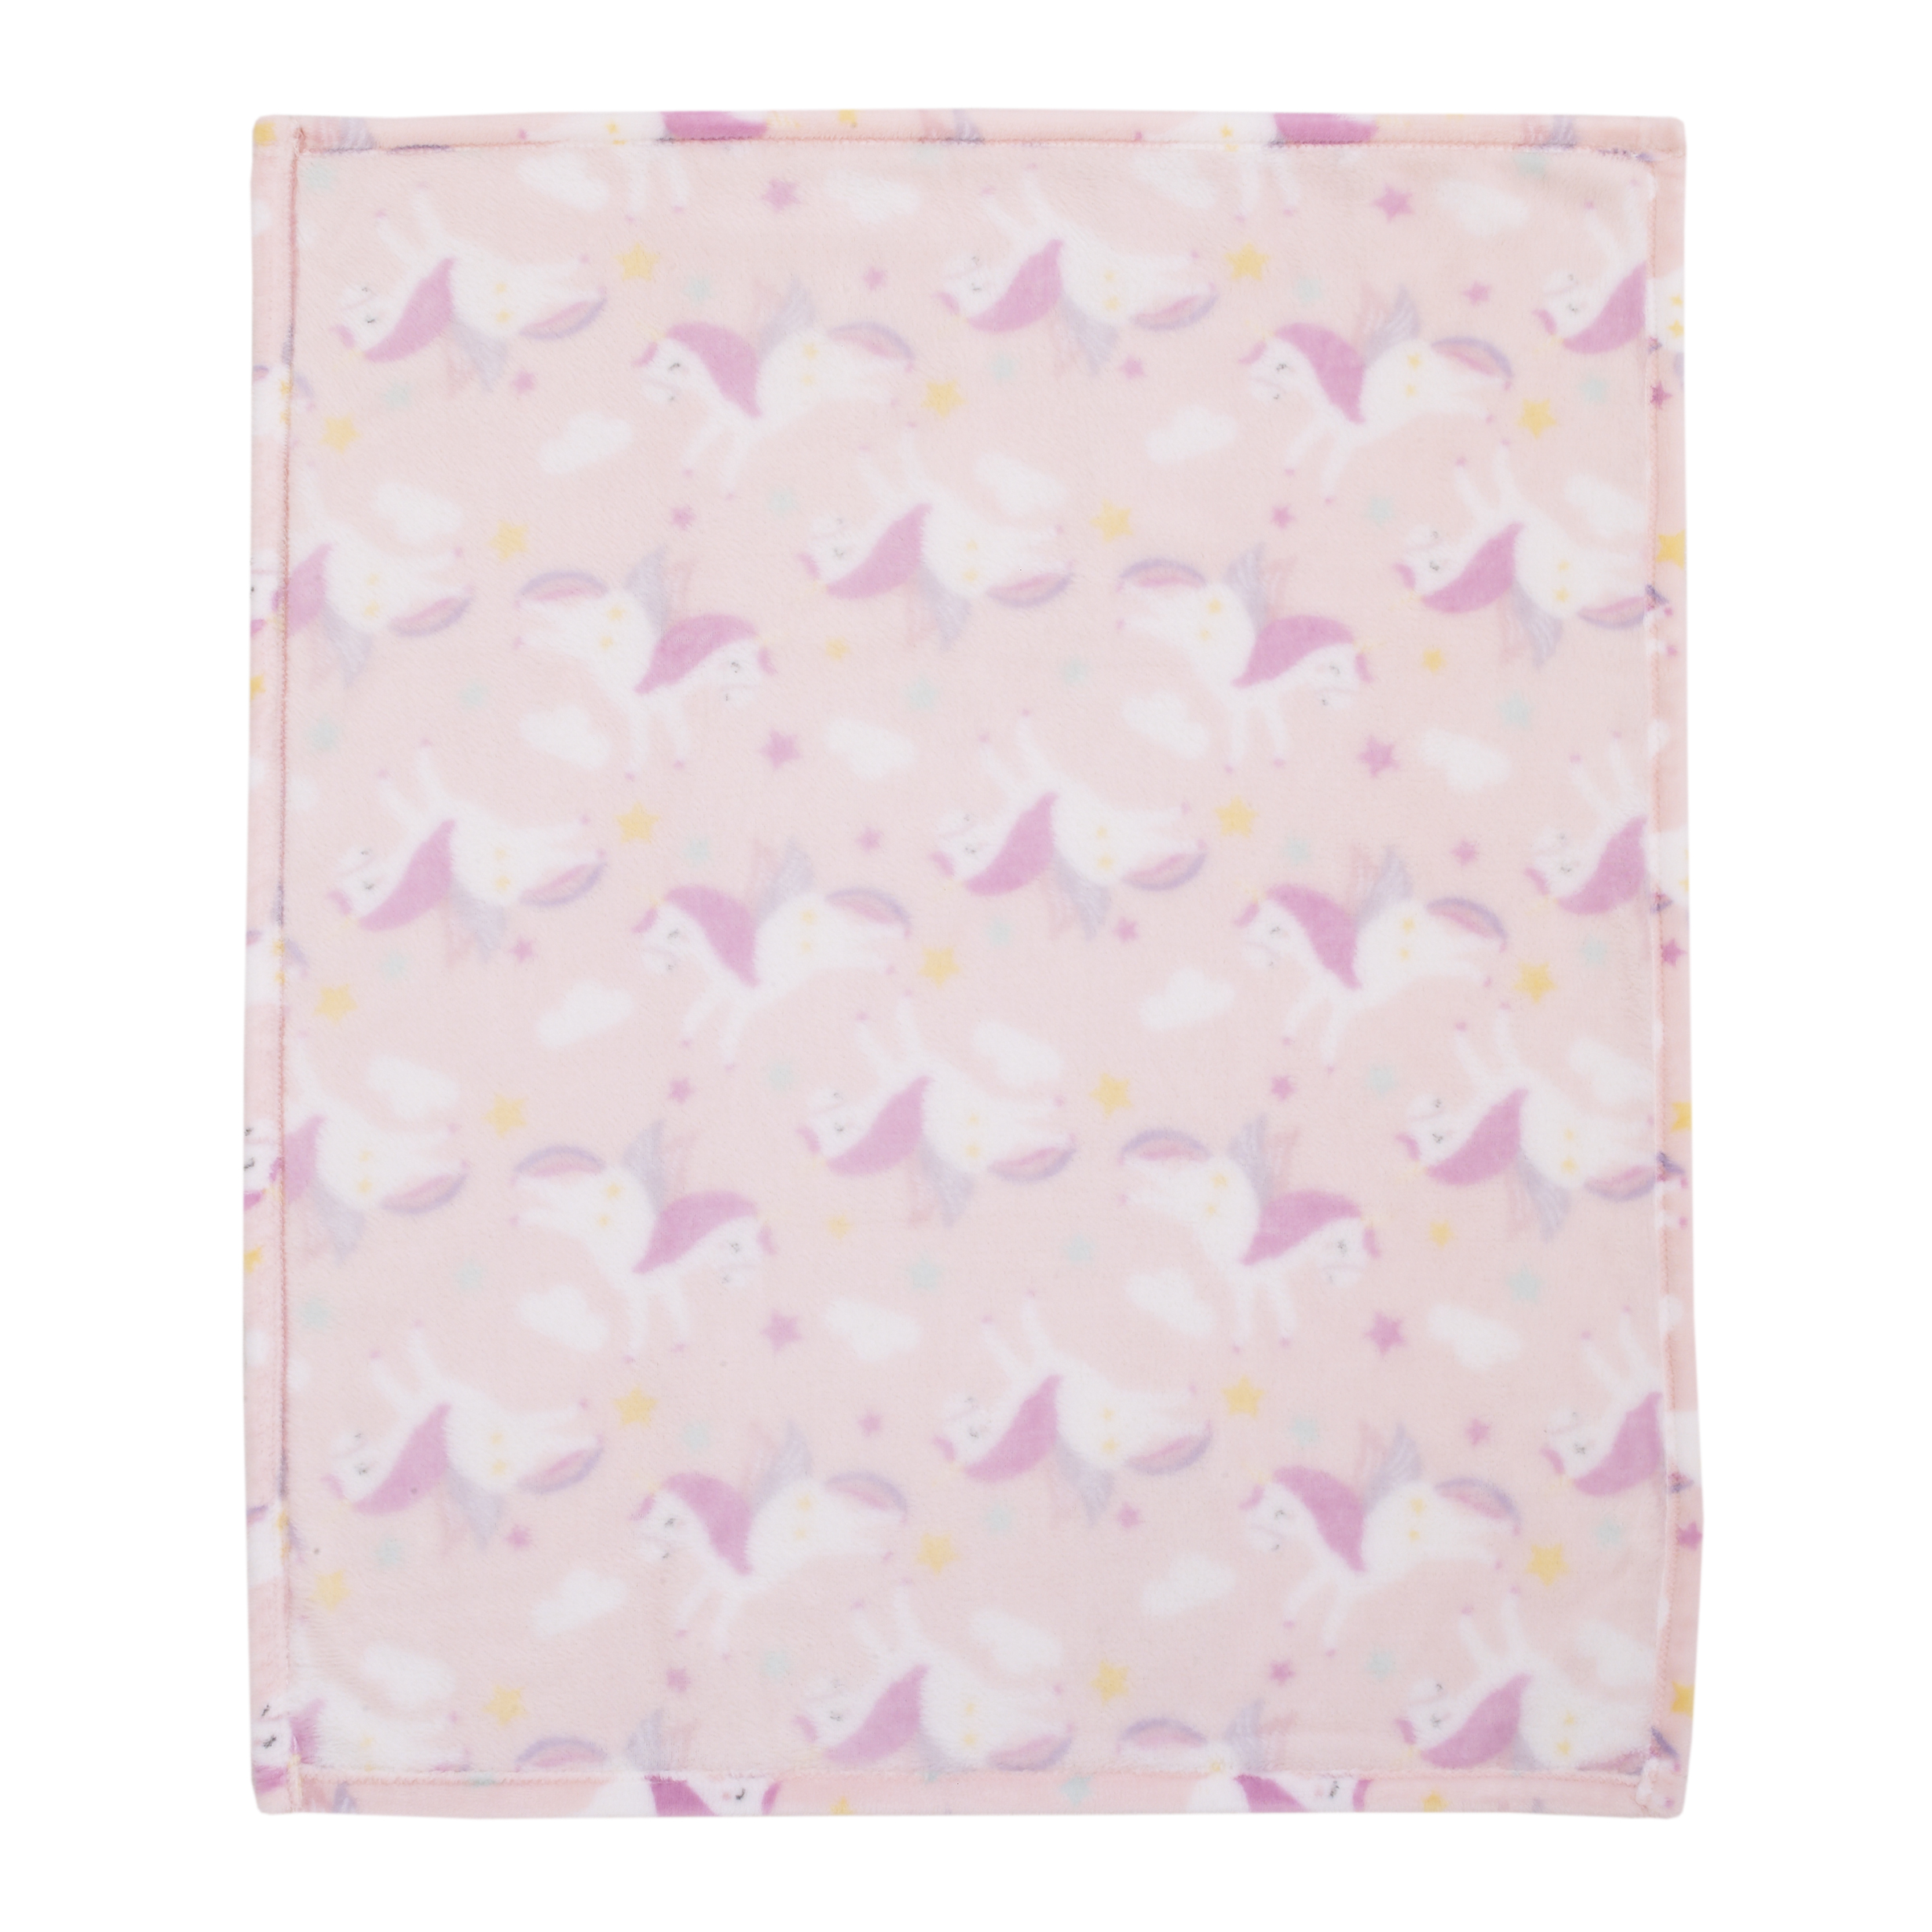 Parent's Choice Plush Baby Blanket, Pink Unicorn Print, 30x36 inches, Pink, White, Infant Girl - image 3 of 7